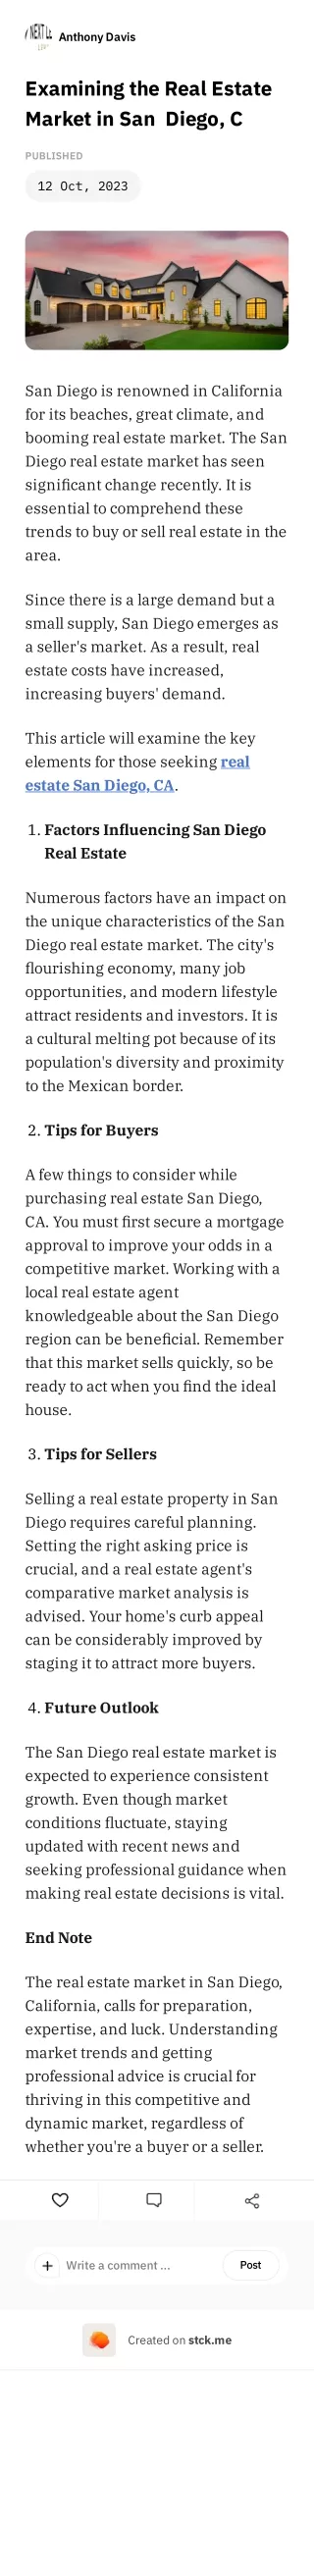 Examining the Real Estate Market in San  Diego, CA